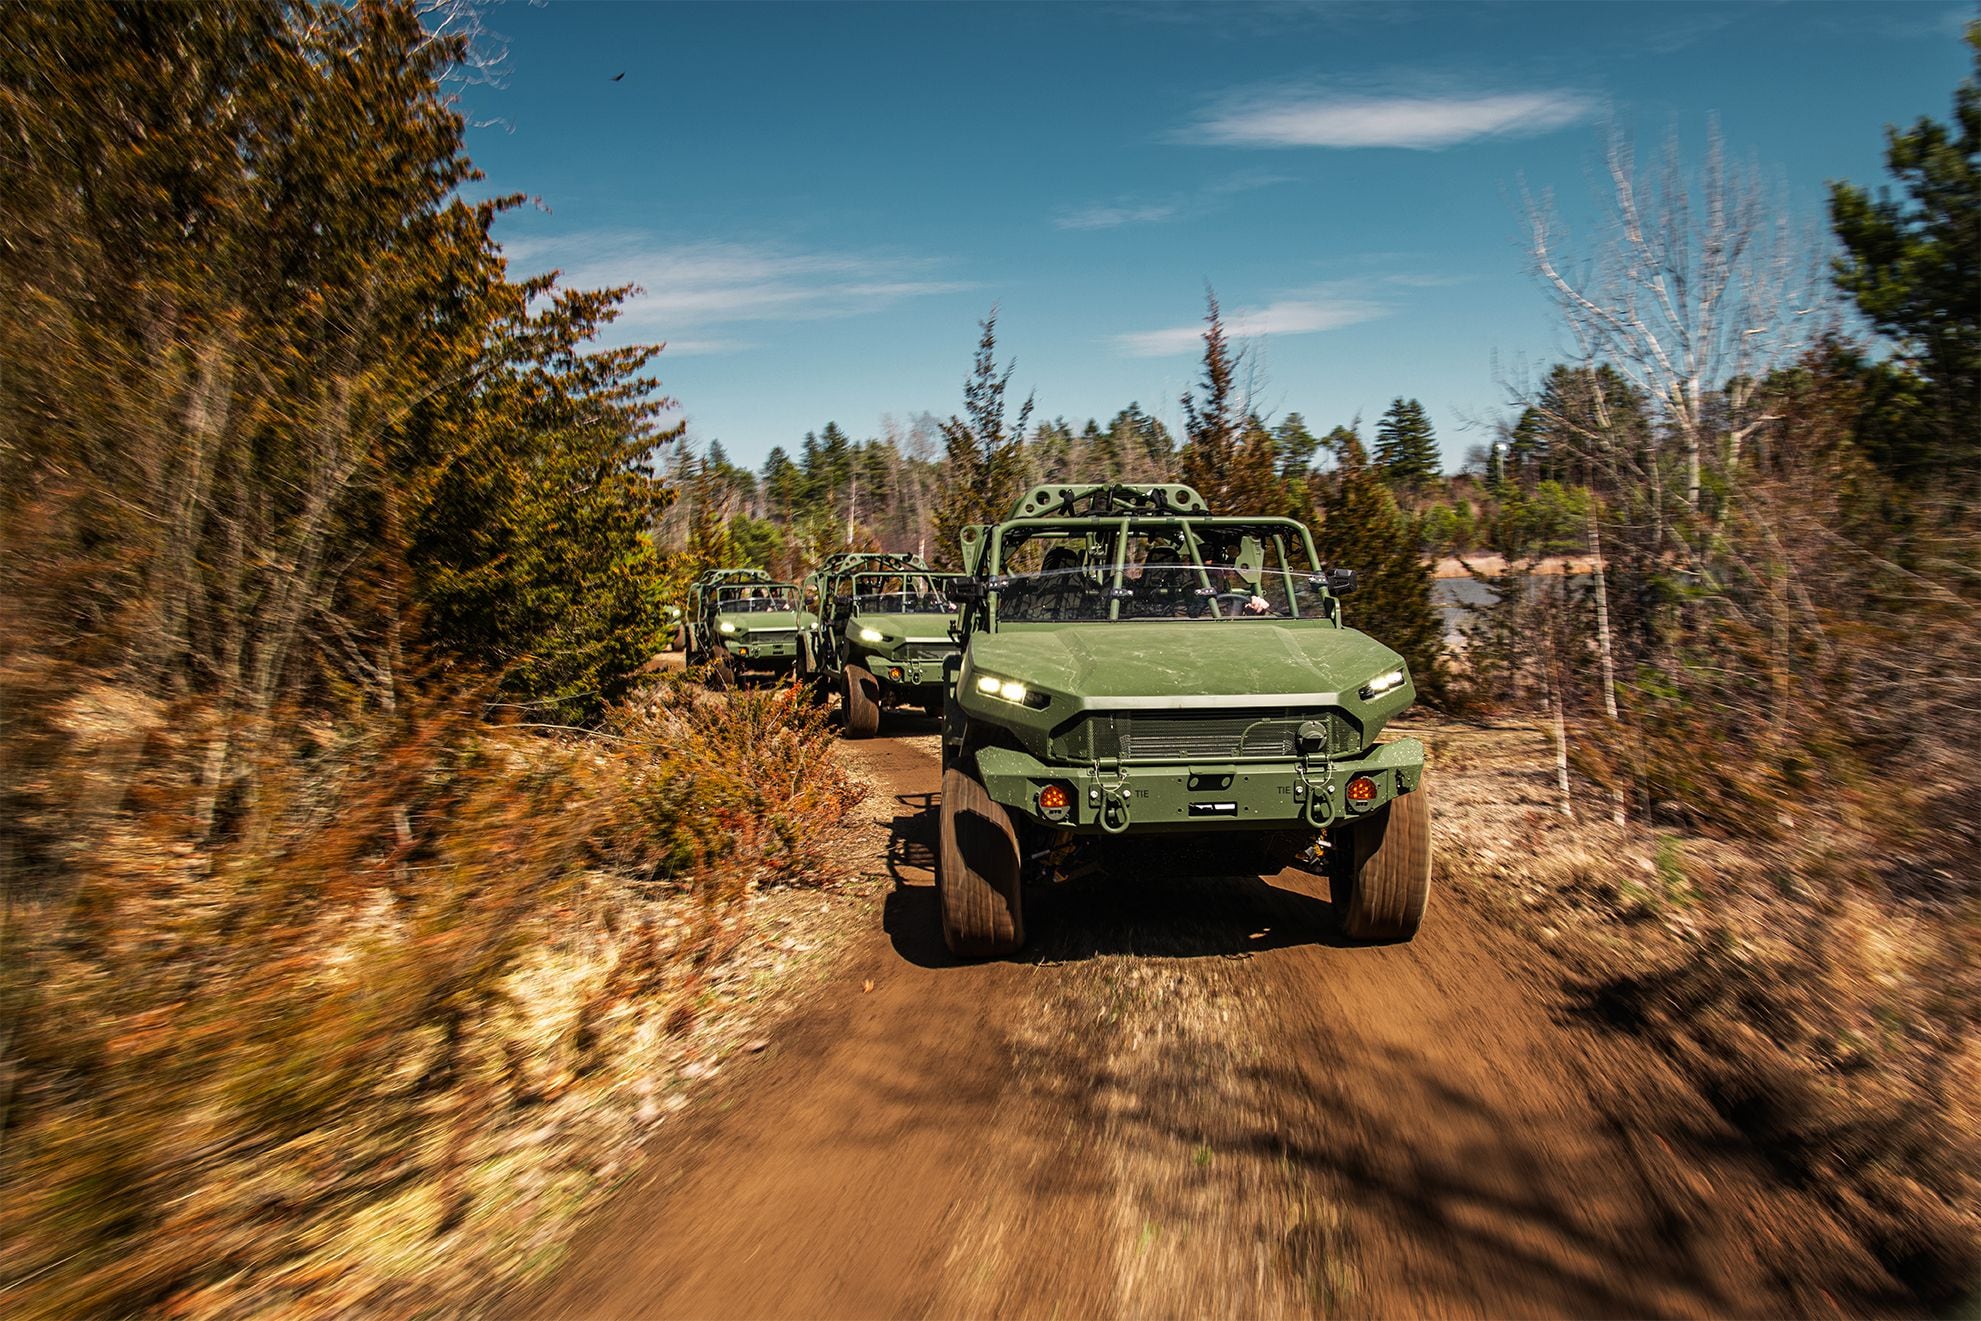 GM Defense is building the Army's Infantry Squad Vehicle, which is already being fielded to Army units. It has taken an ISV and turned it into an all-electric concept vehicle to show the Army the realm of the possible. (Courtesy of GM Defense)